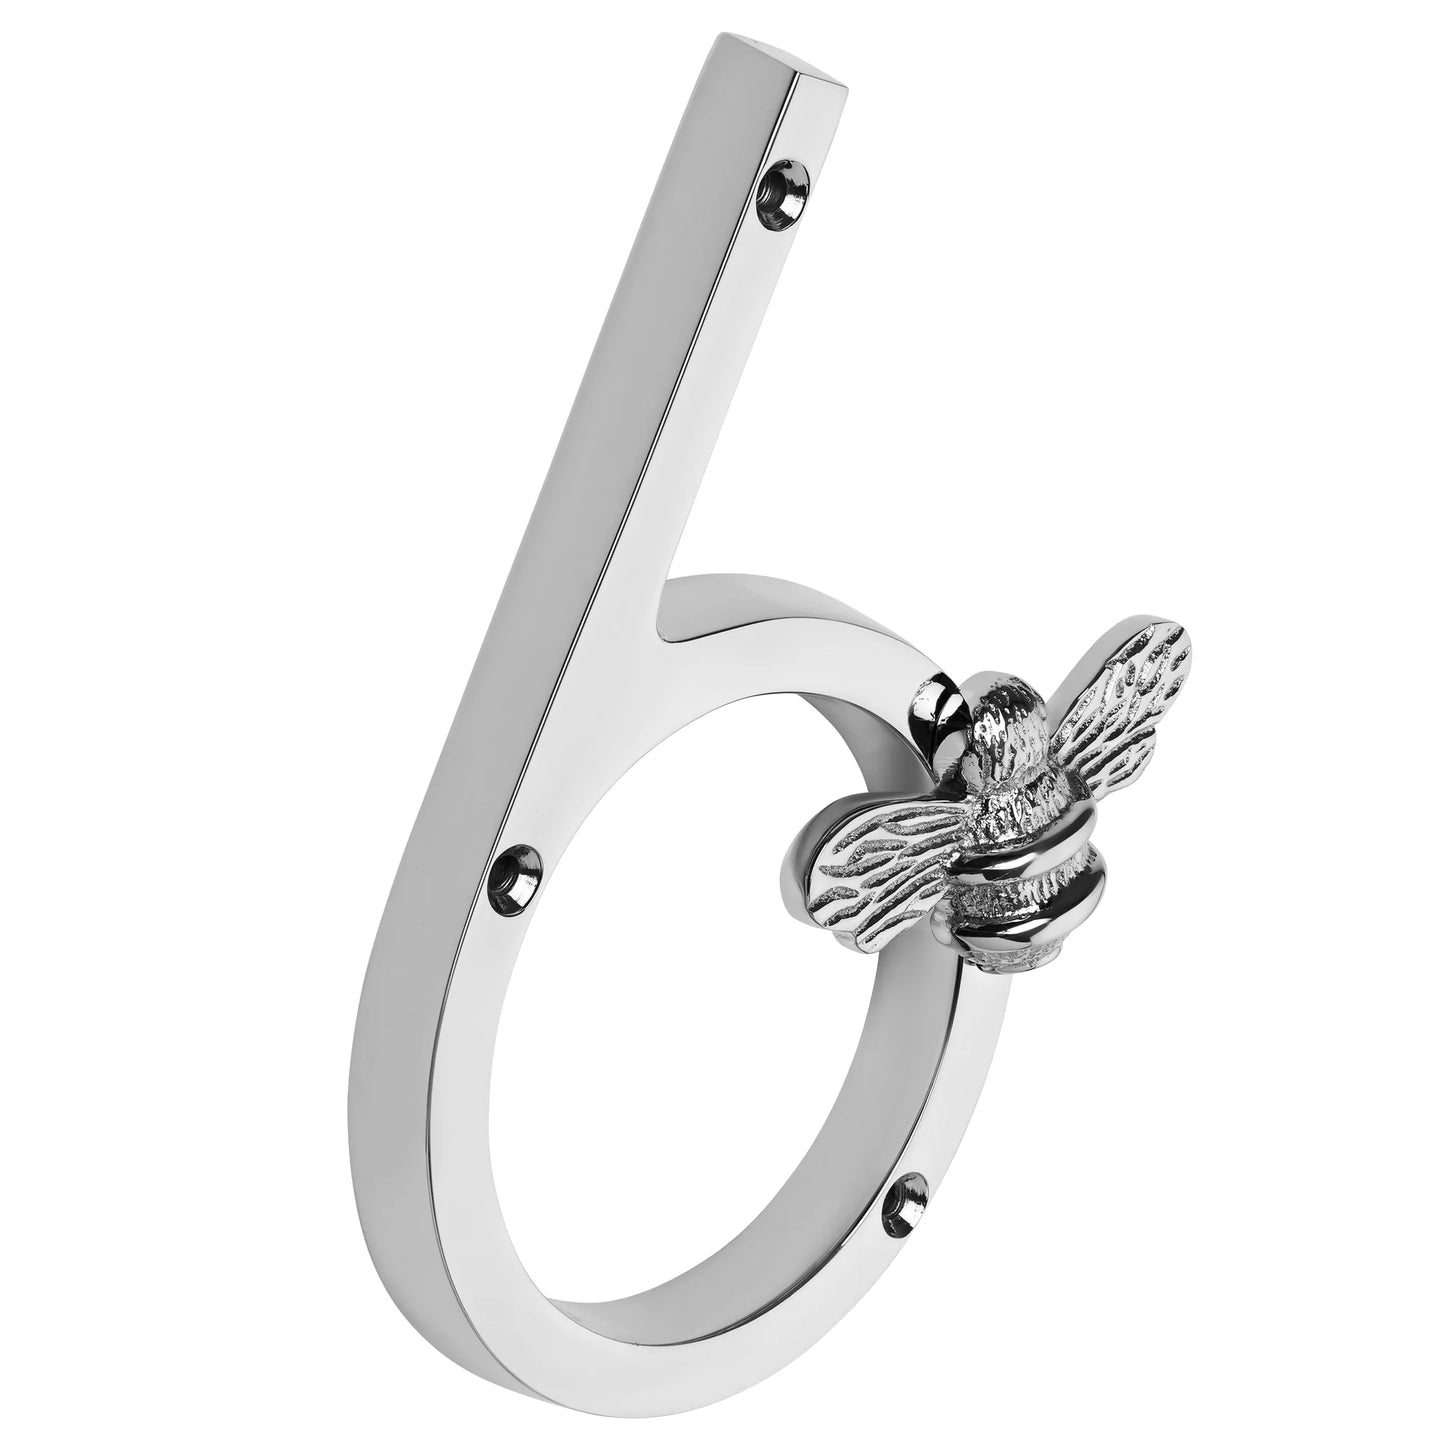 House Number with bee, Nickel finish